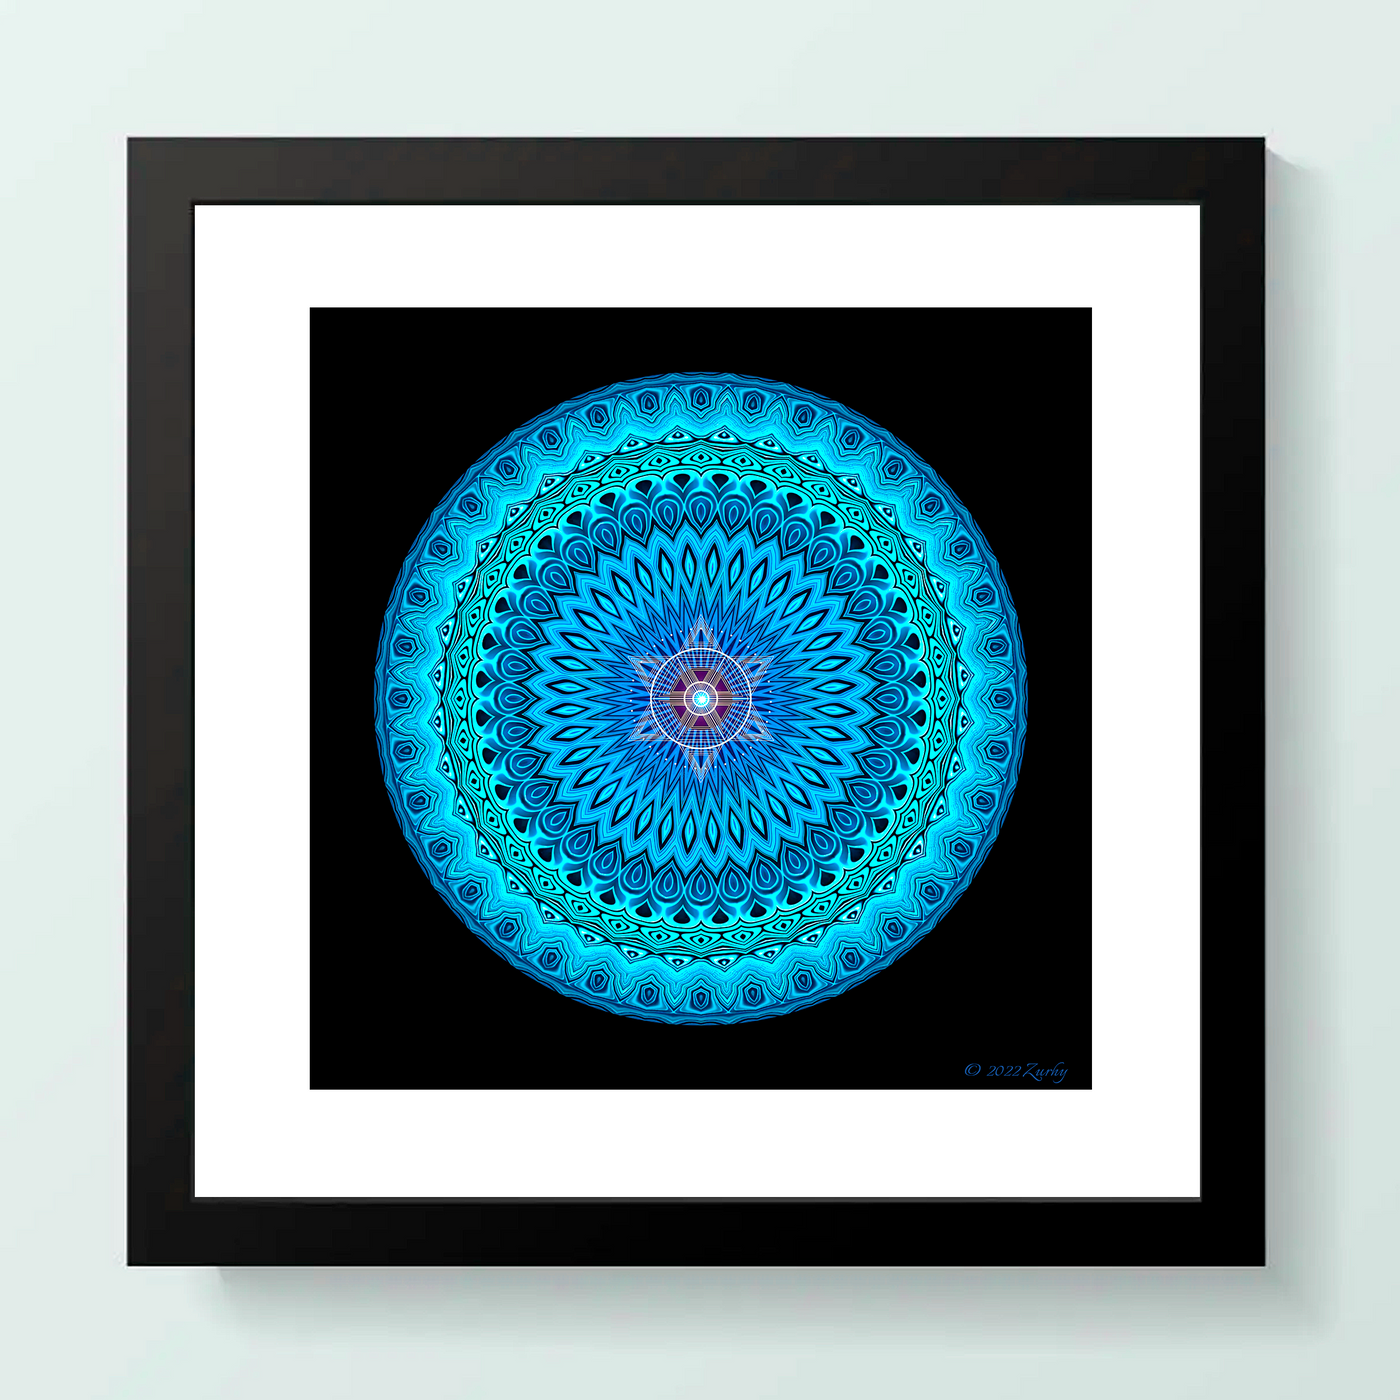 15 - LUX - Giclée Wall Art Print - Satin Luster Paper - Sacred Geometry Symbols of Healing Arts